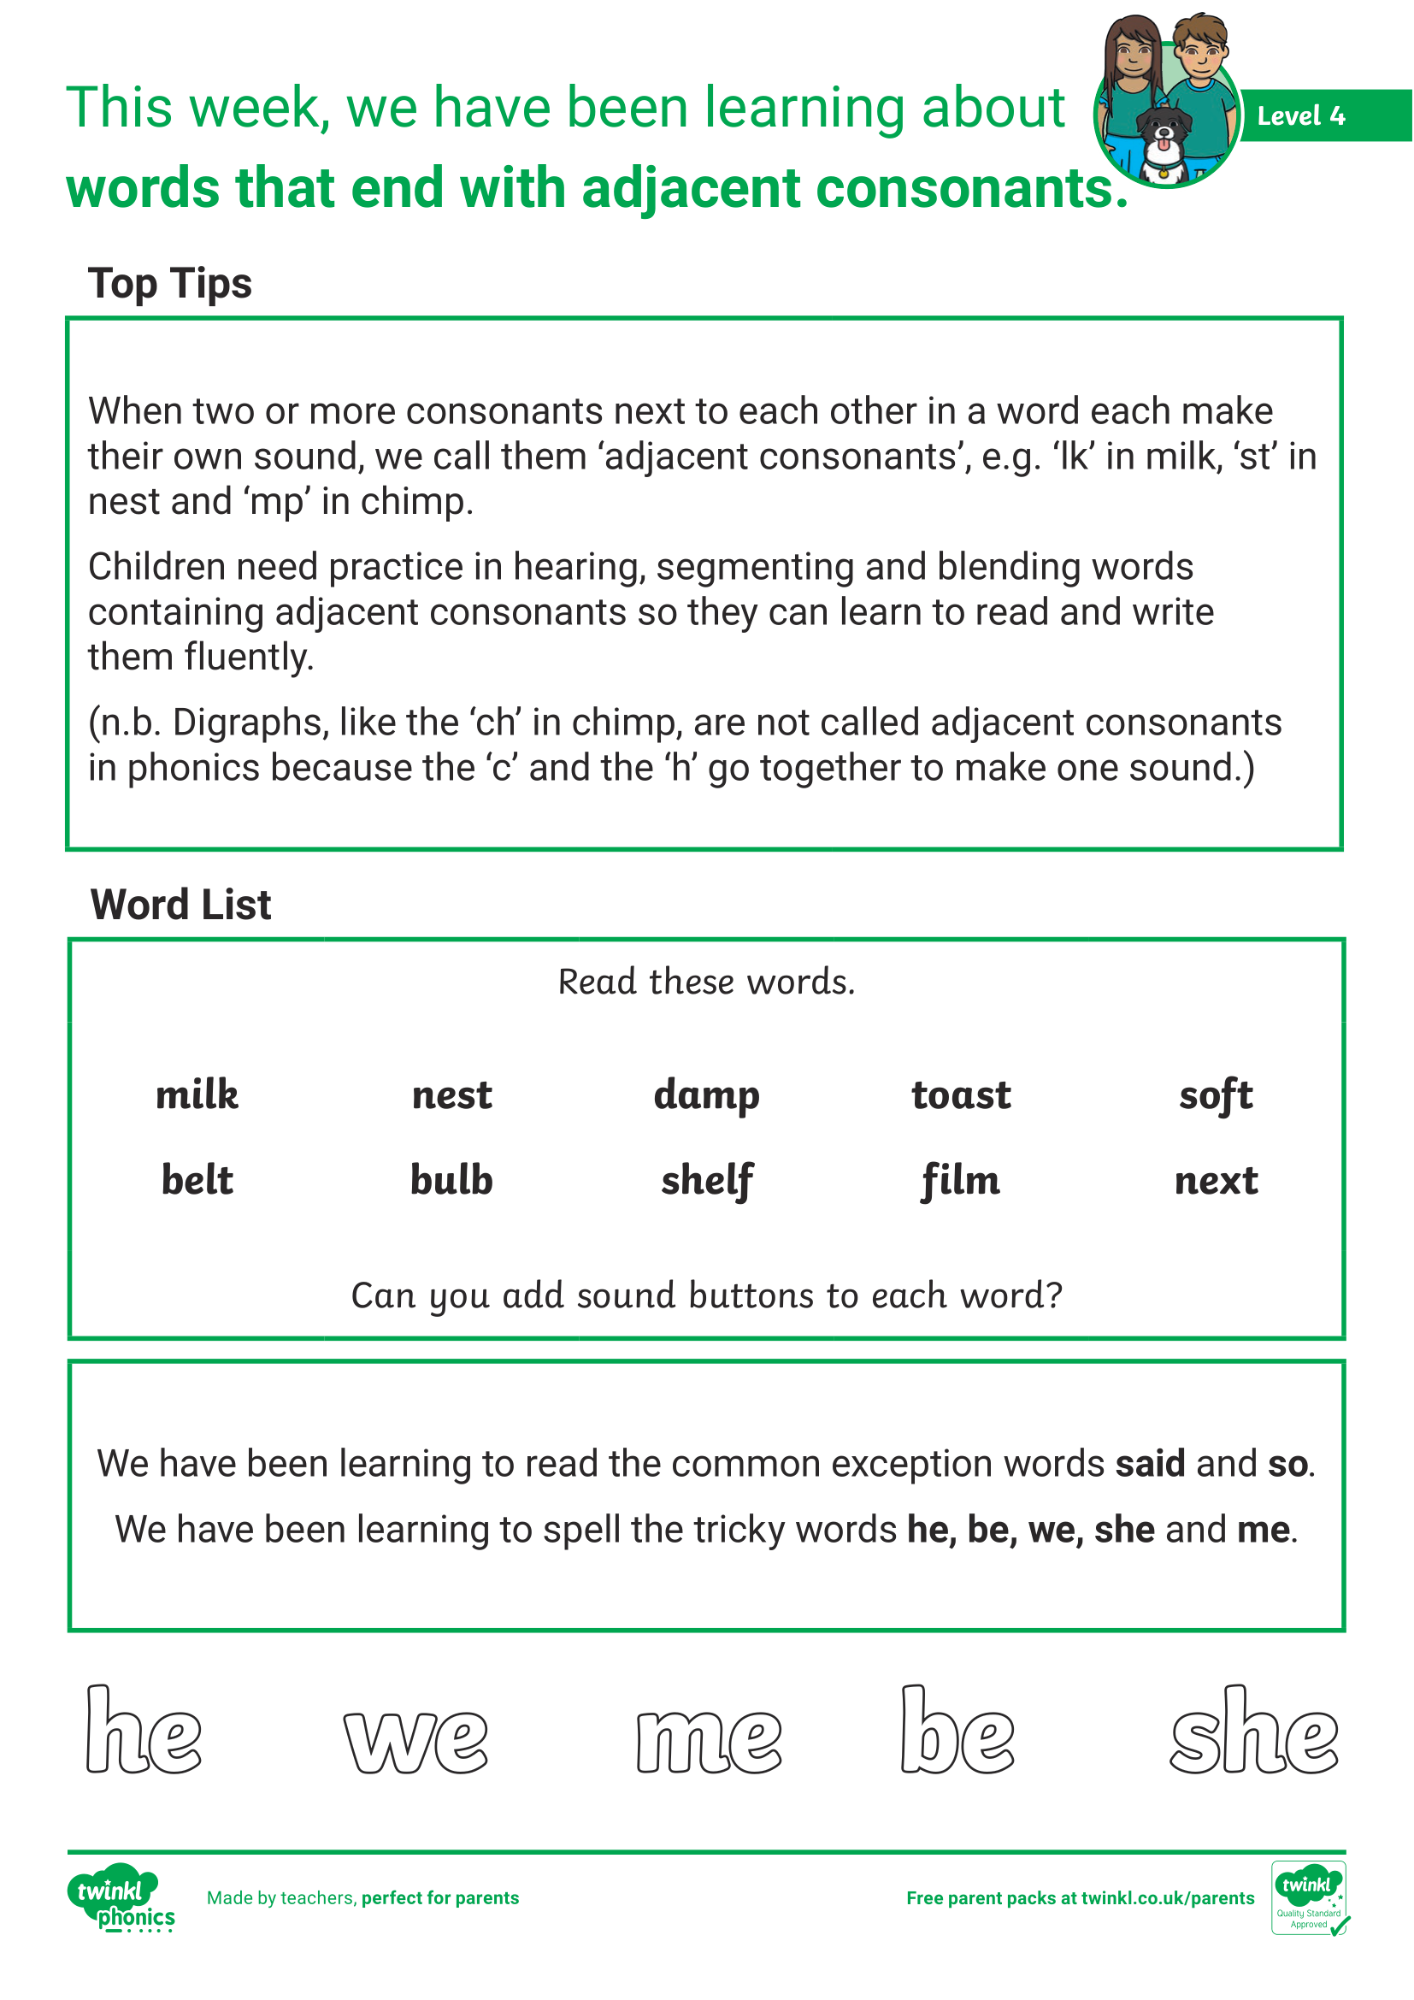 Image of Phonics Level 4 - Week 1 - CVCC Words (Words That End With Adjacent Consonants).